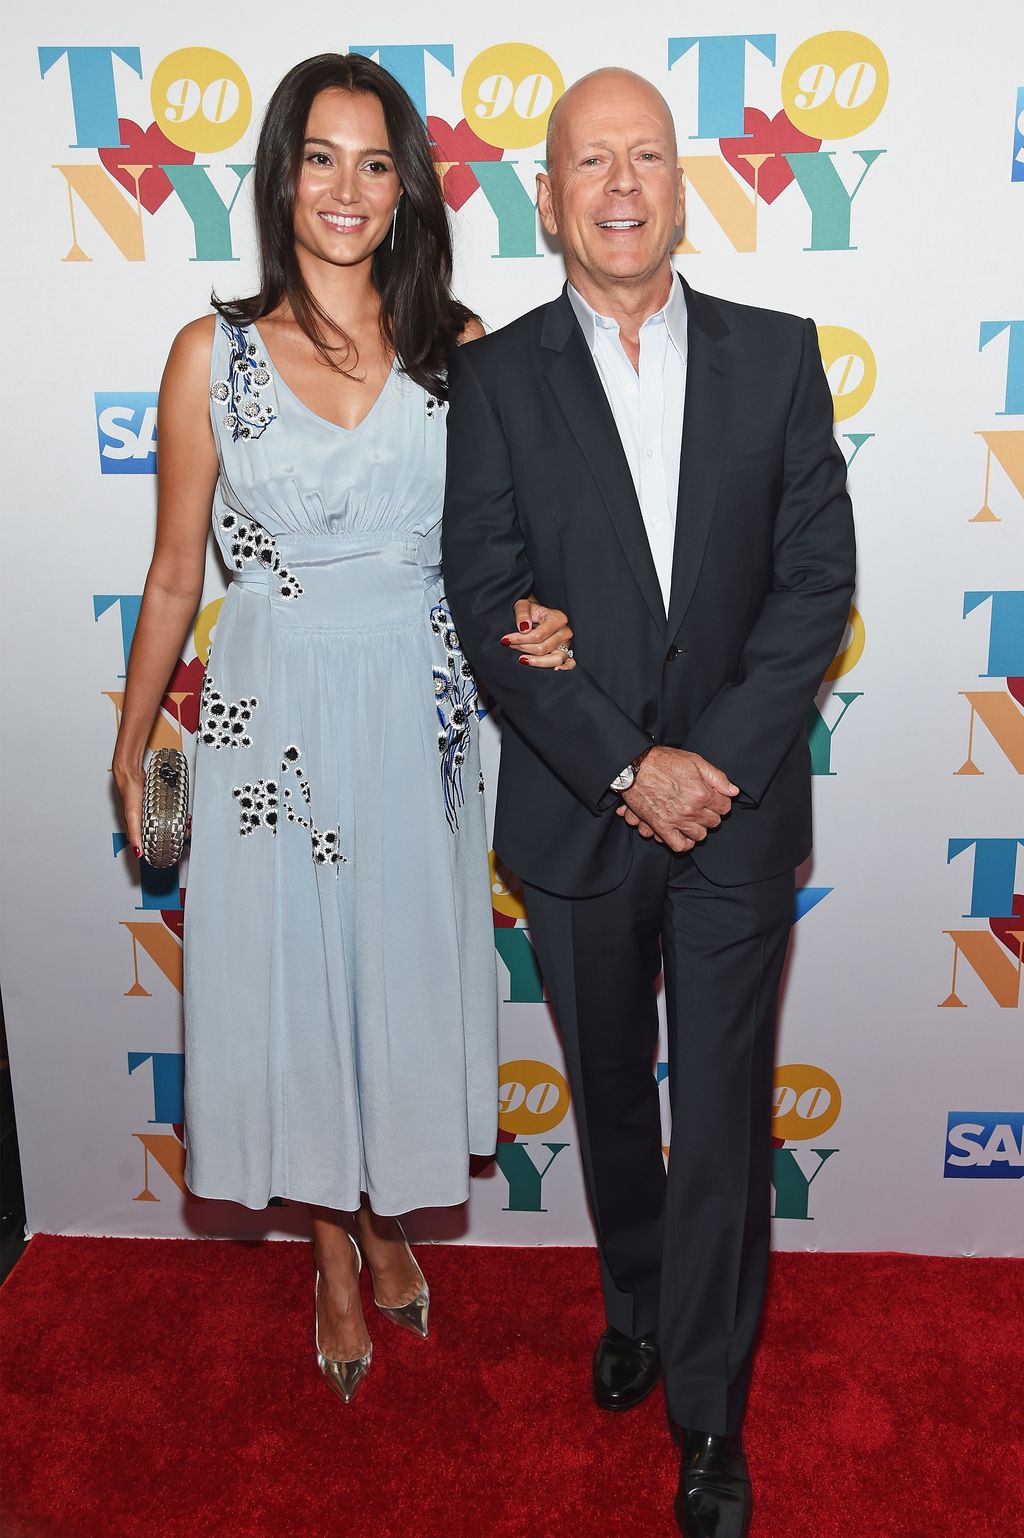 Emma Heming Willis and Bruce Willis smiling which being photo'd at a red carpet event 